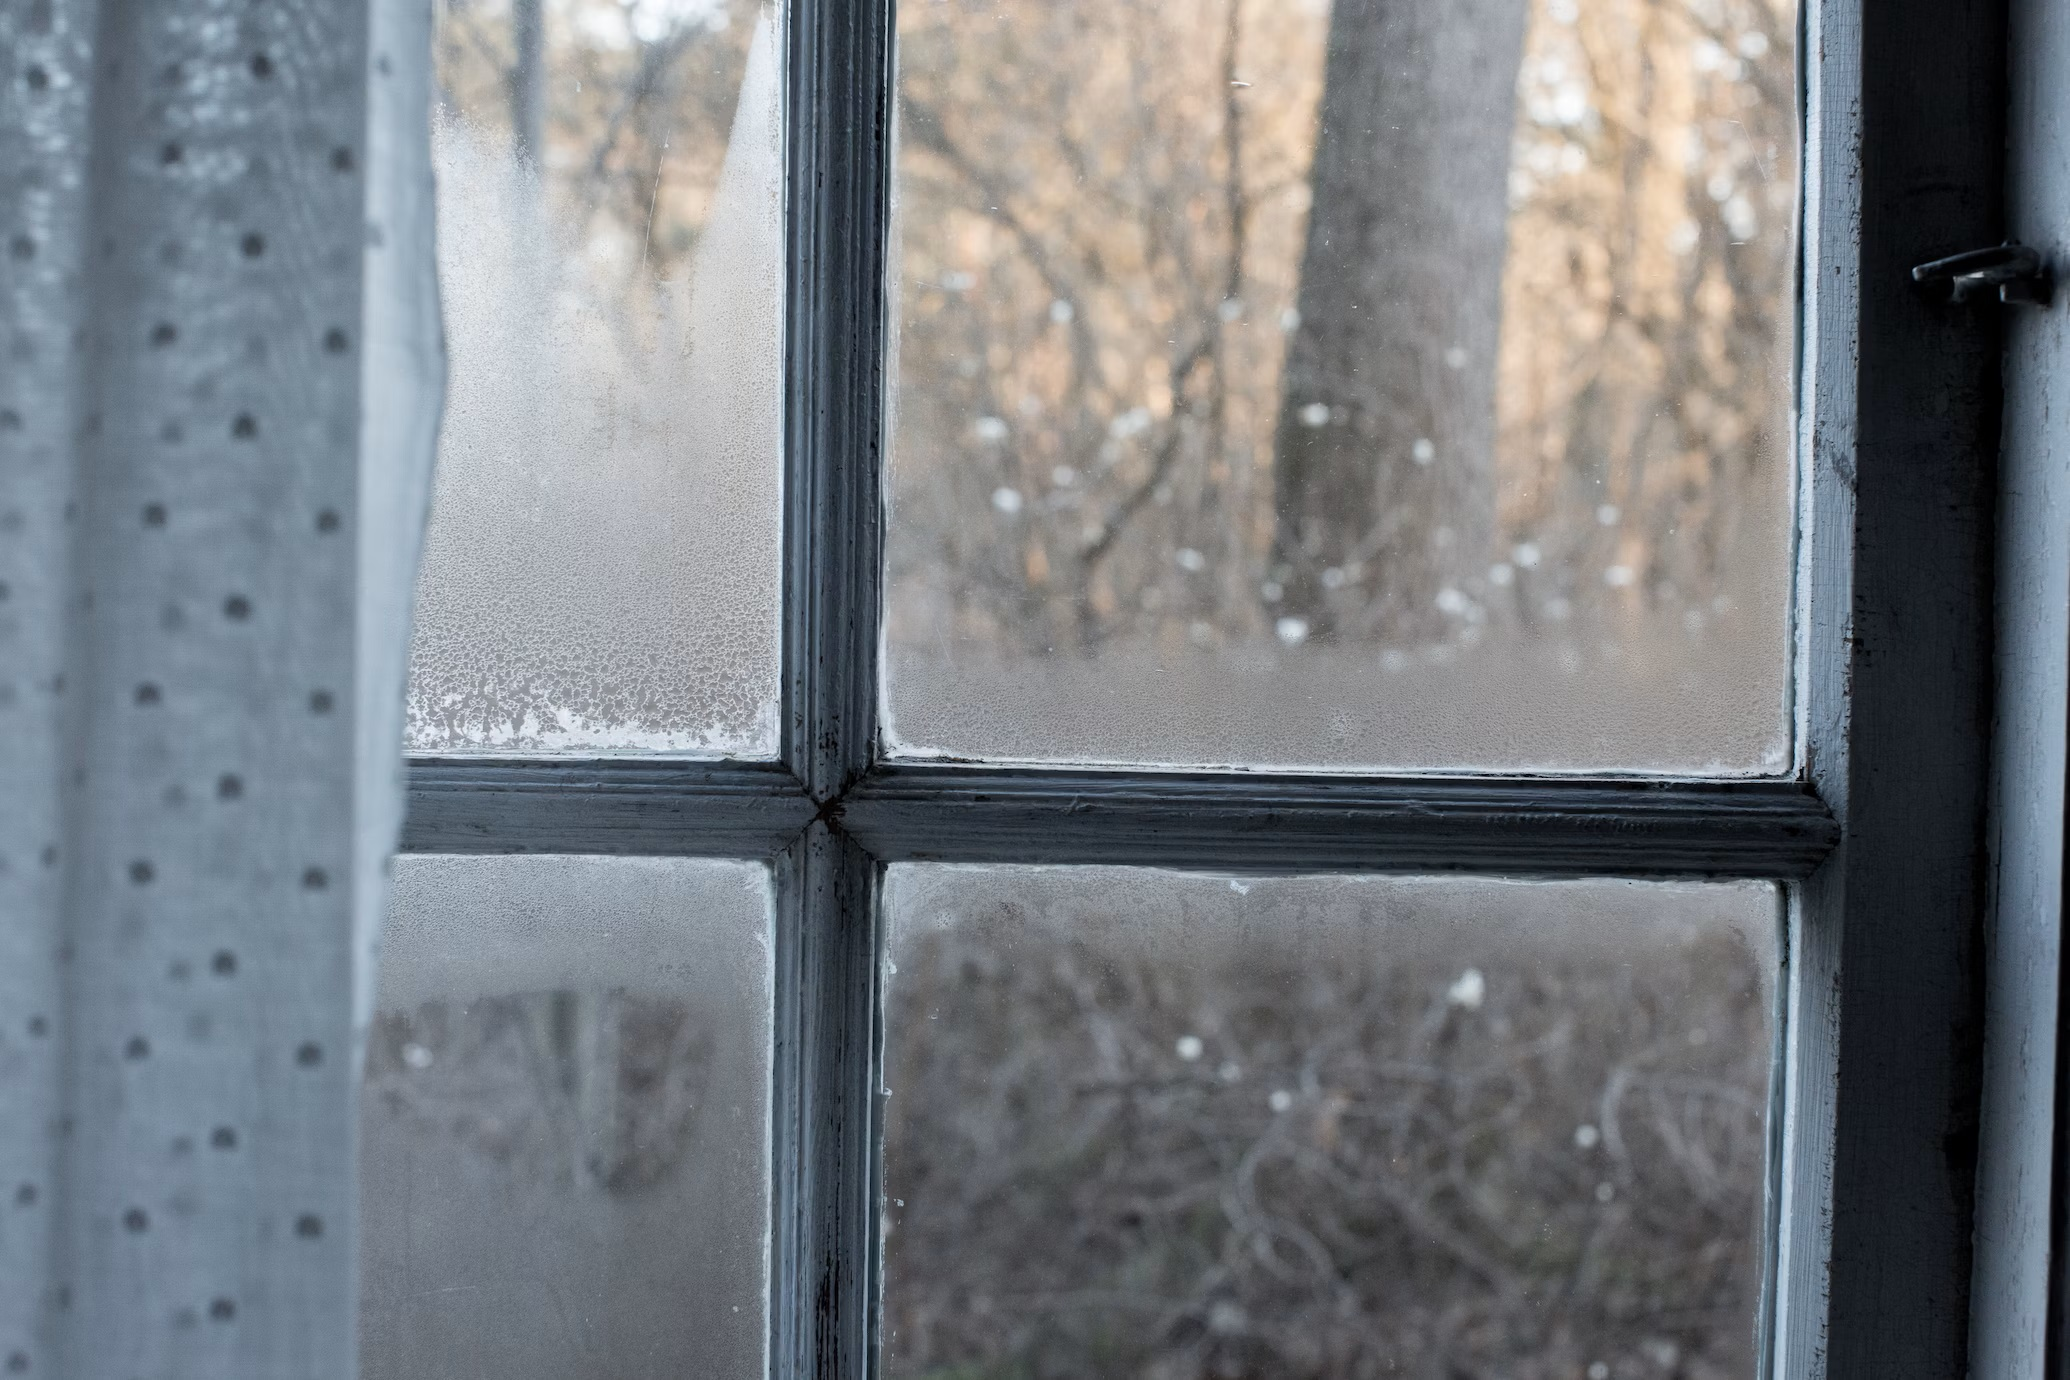 Home draught proofing - sliding sash windows - cold air 